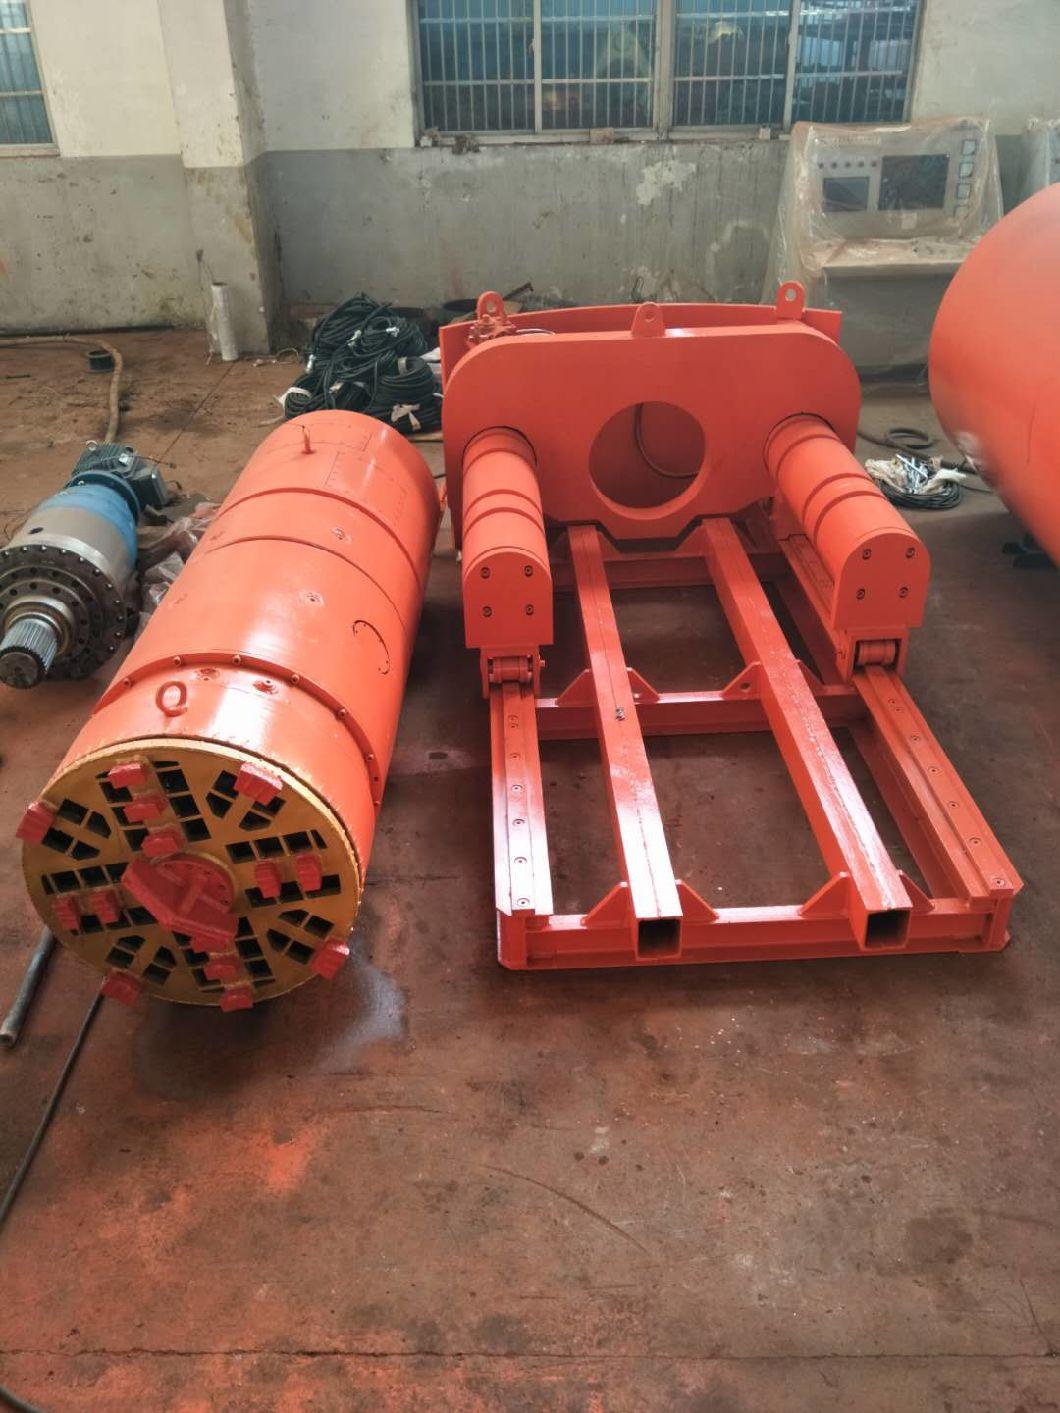 Trenchless Npd 600 Slurry Pipe Jacking Machine for Pipeline